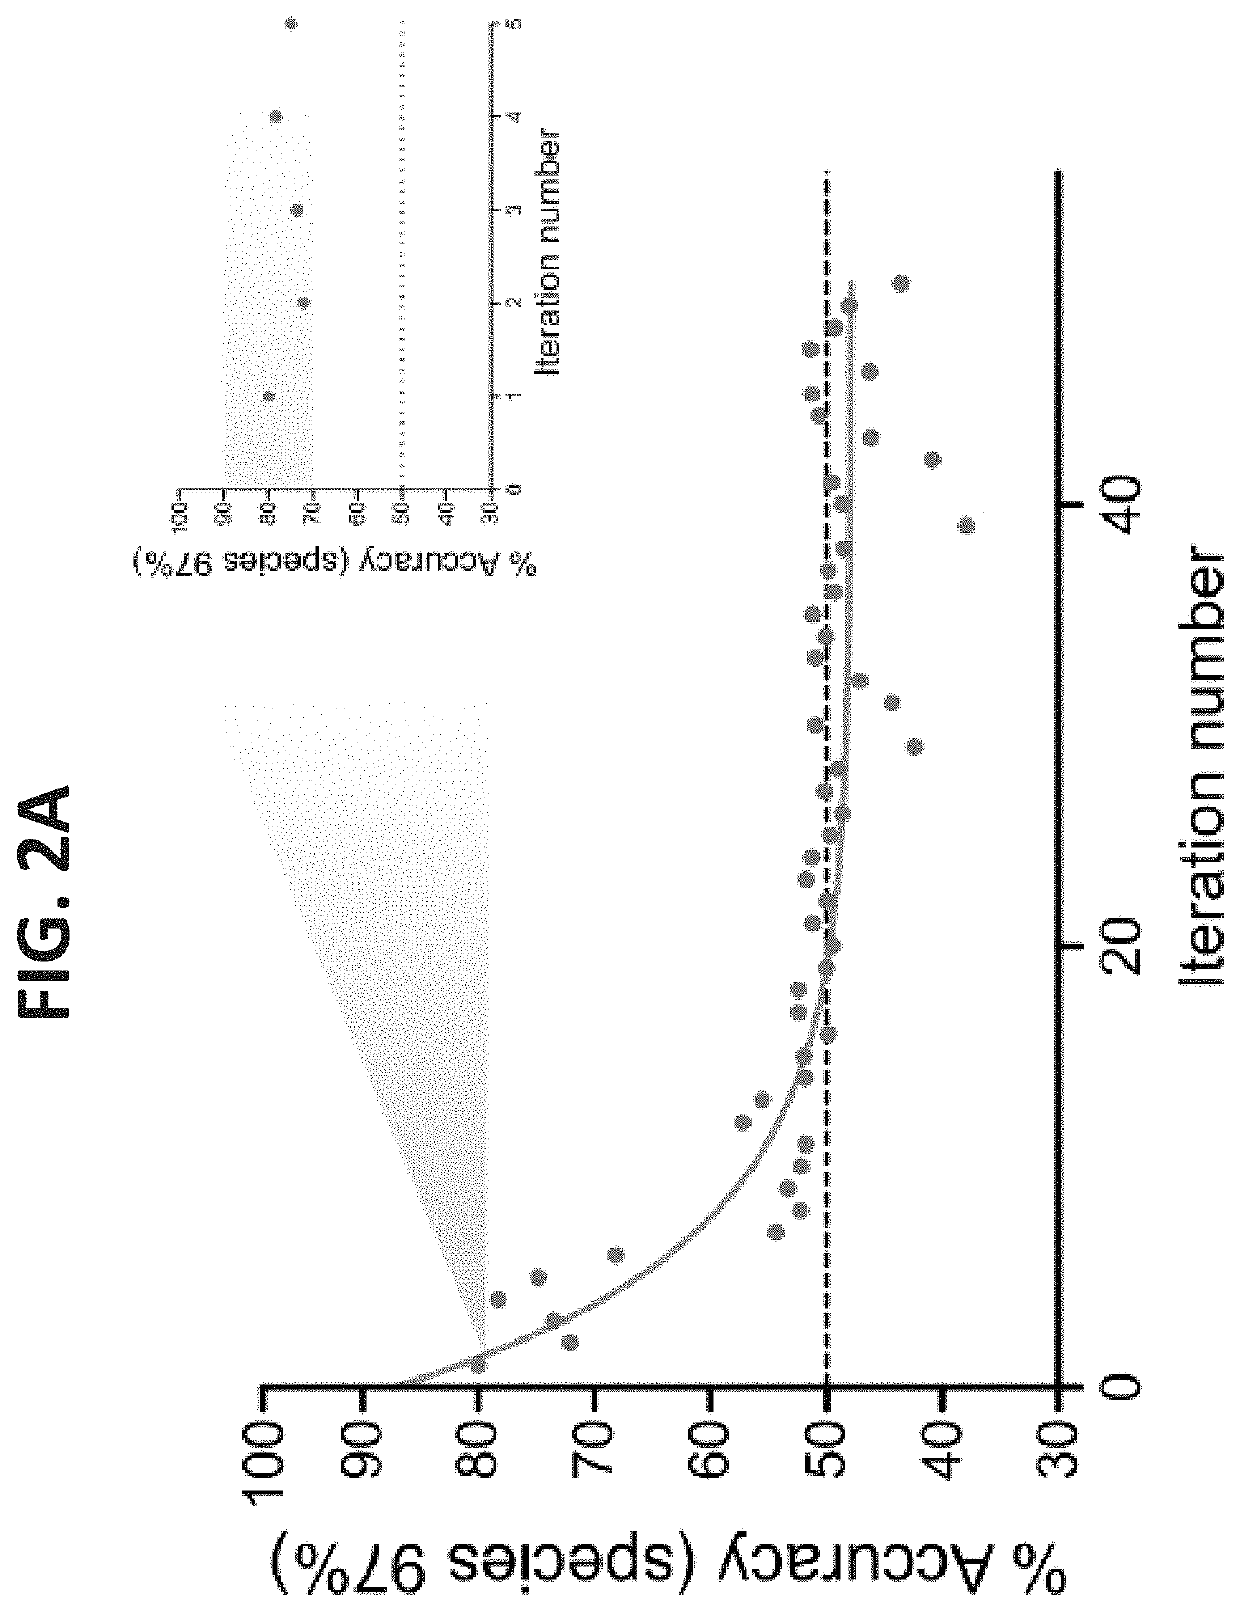 Regulation of feed efficiency and methane production in ruminating animals